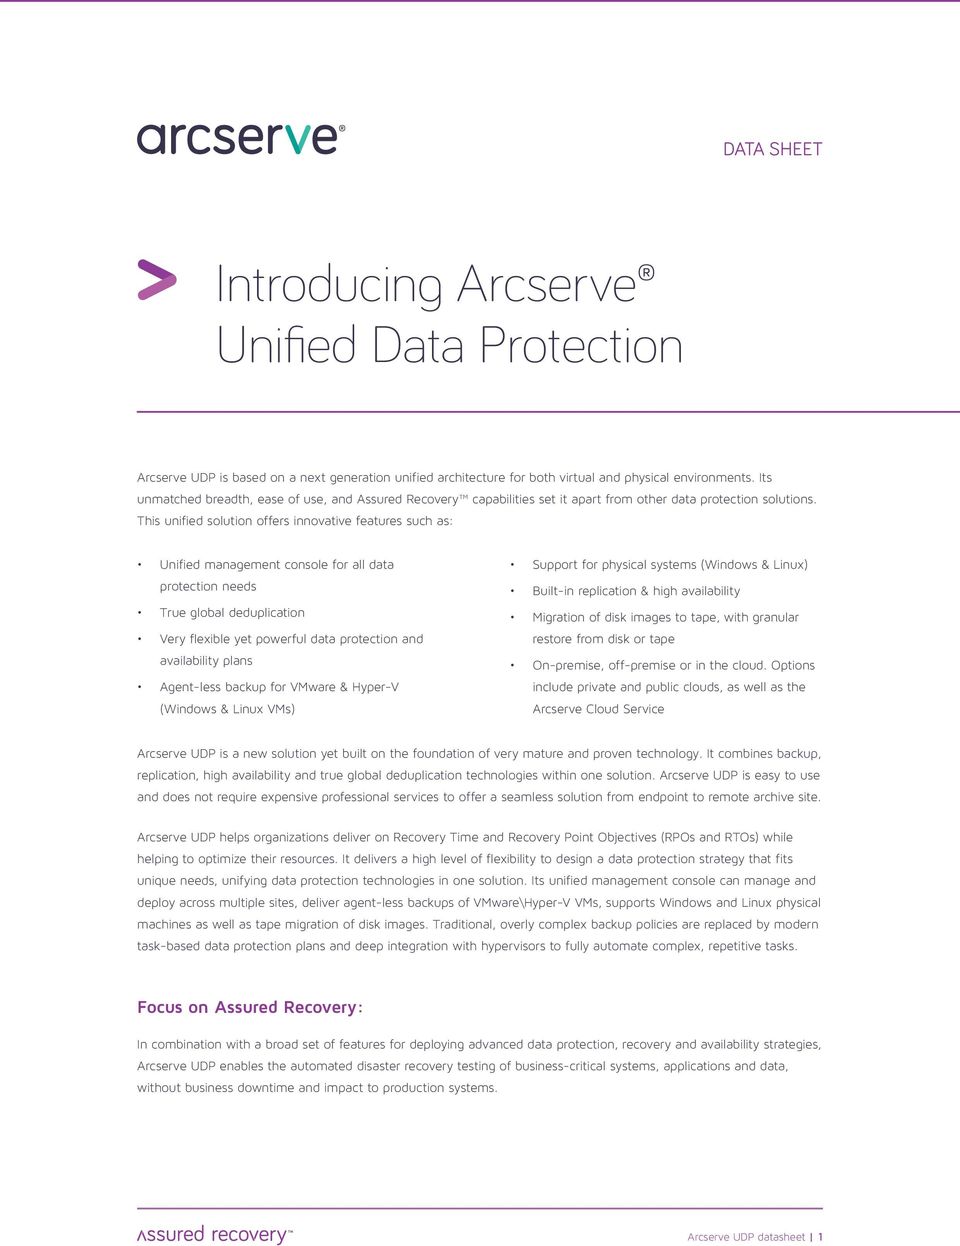 This unified solution offers innovative features such as: Unified management console for all data protection needs True global deduplication Very flexible yet powerful data protection and